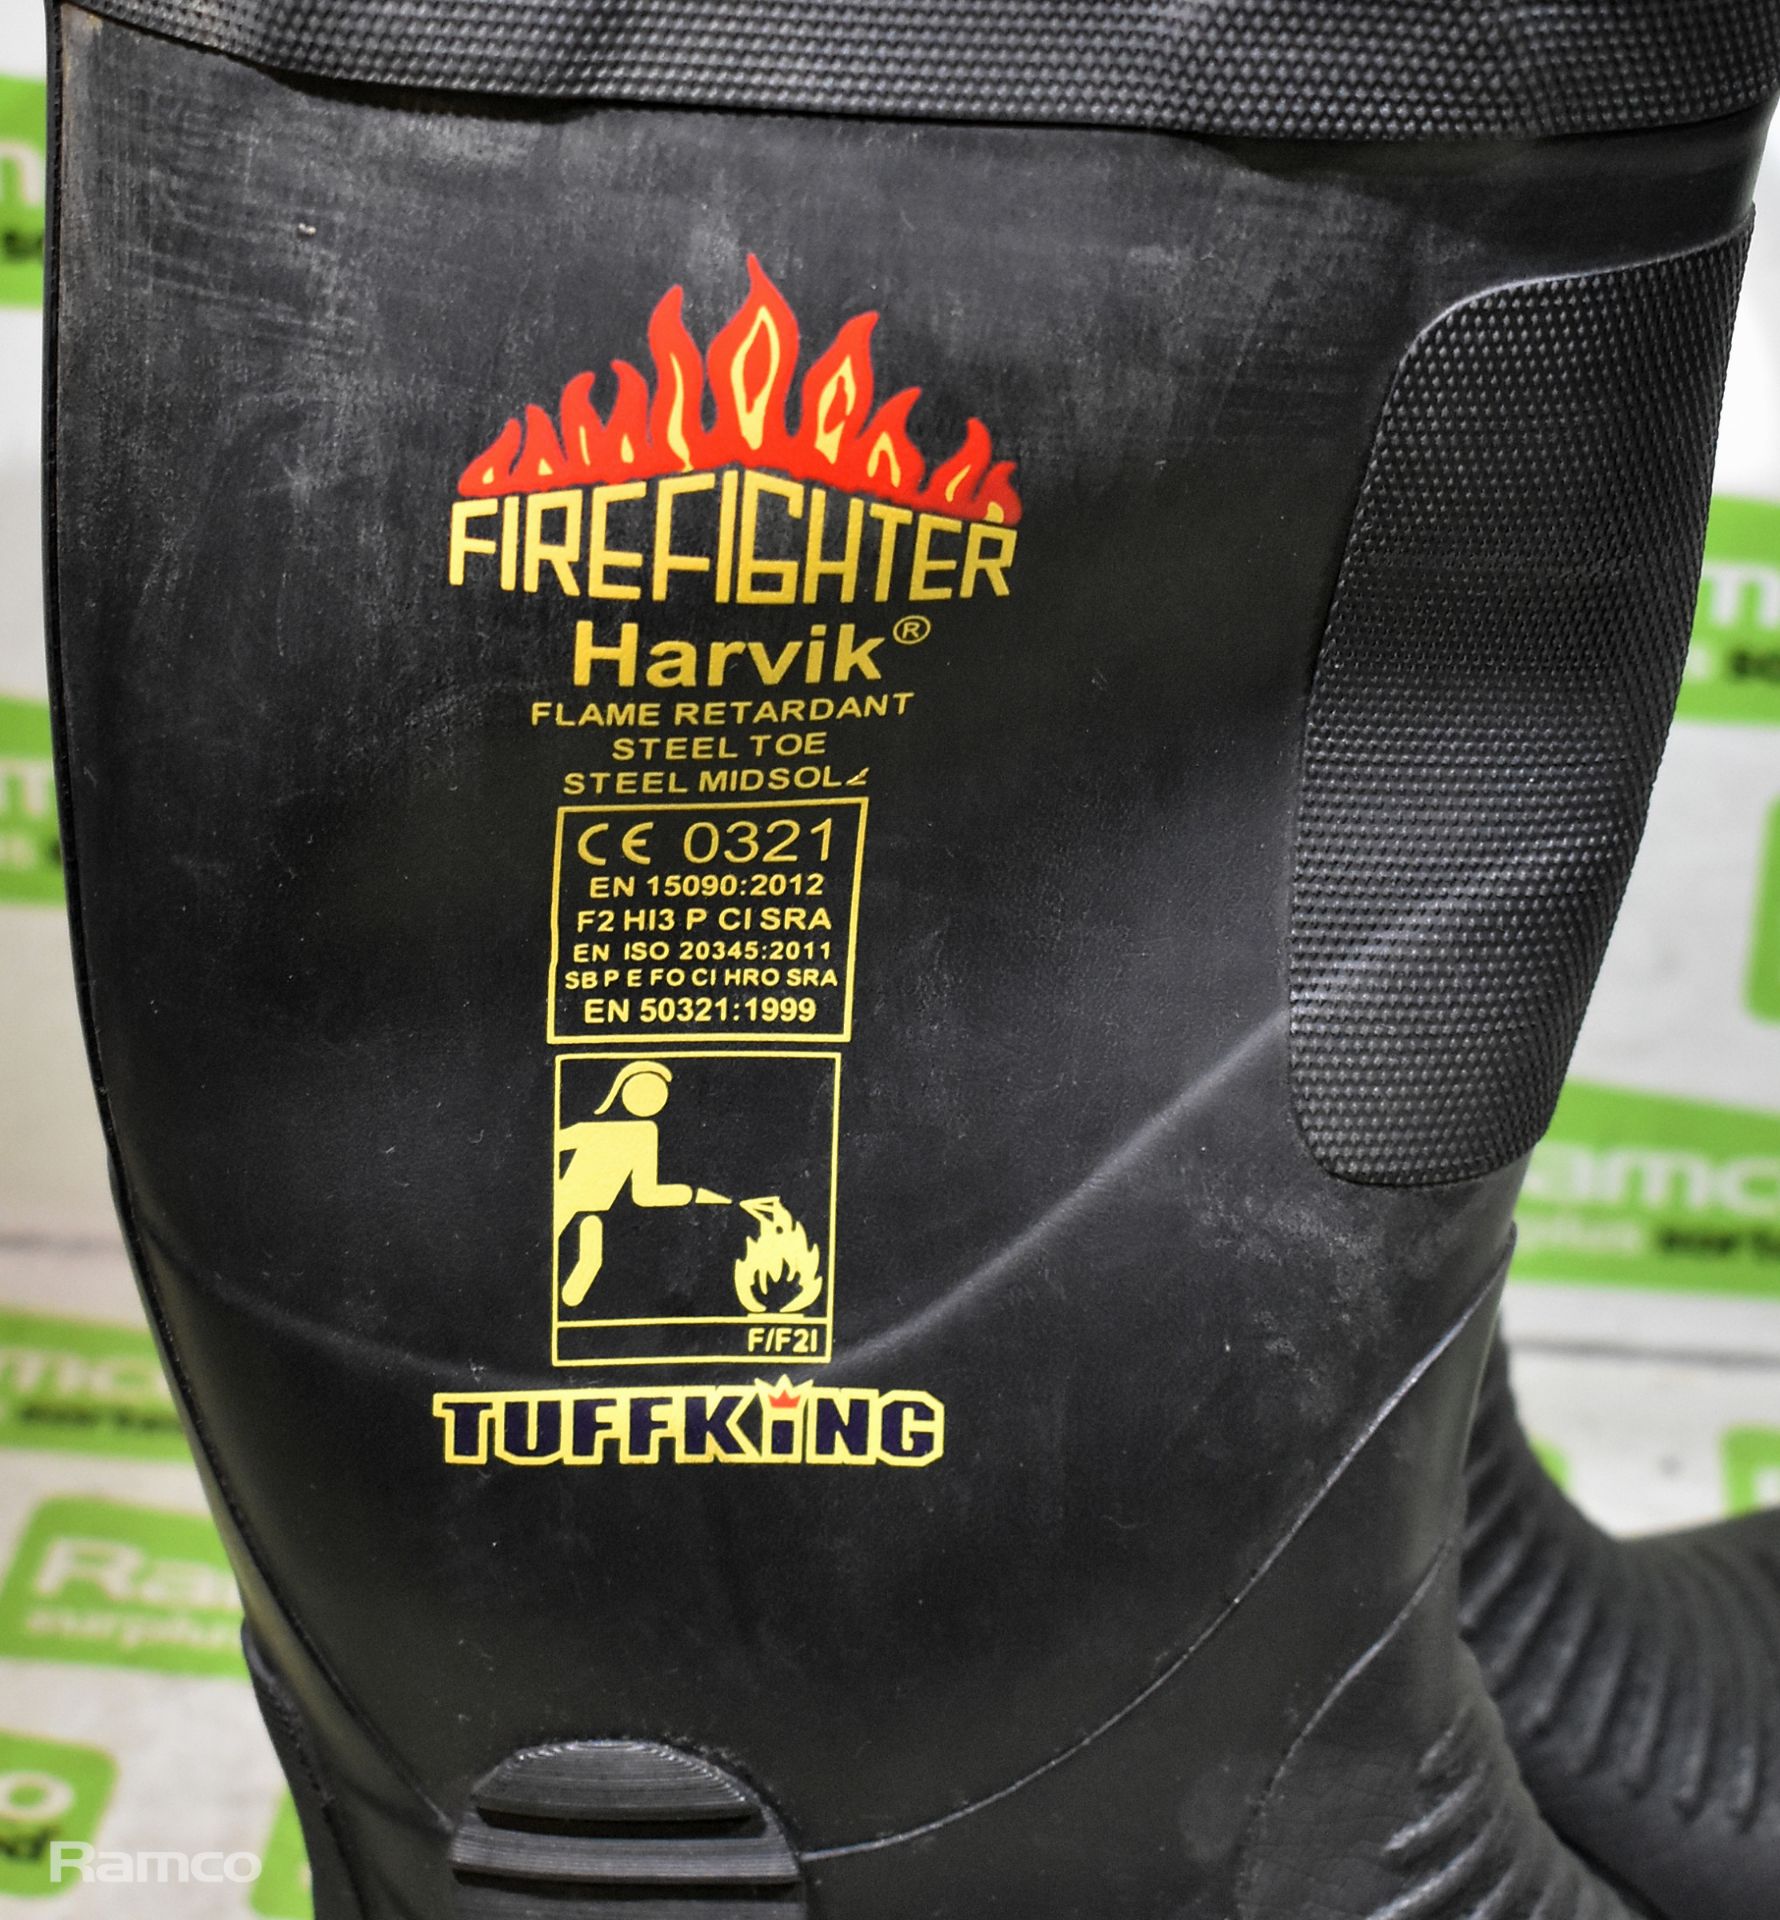 Tuffking Harvik pull-on safety boots / wellies - UK size 4 - Image 2 of 4